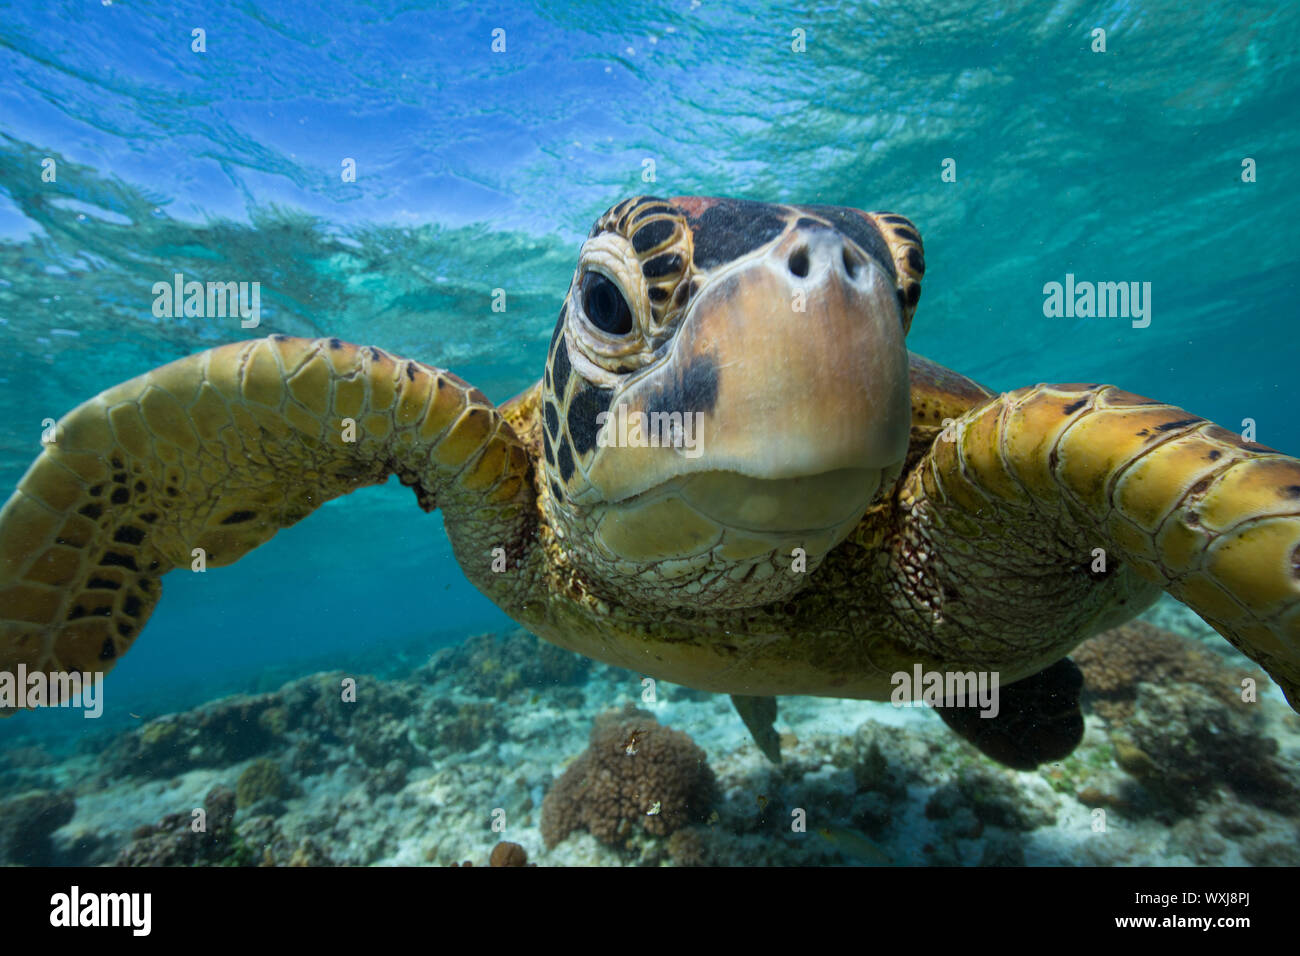 Portrait of a sea turtle swimming over a coral reef, Lady Elliot Island, Great Barrier Reef, Queensland, Australia Stock Photo